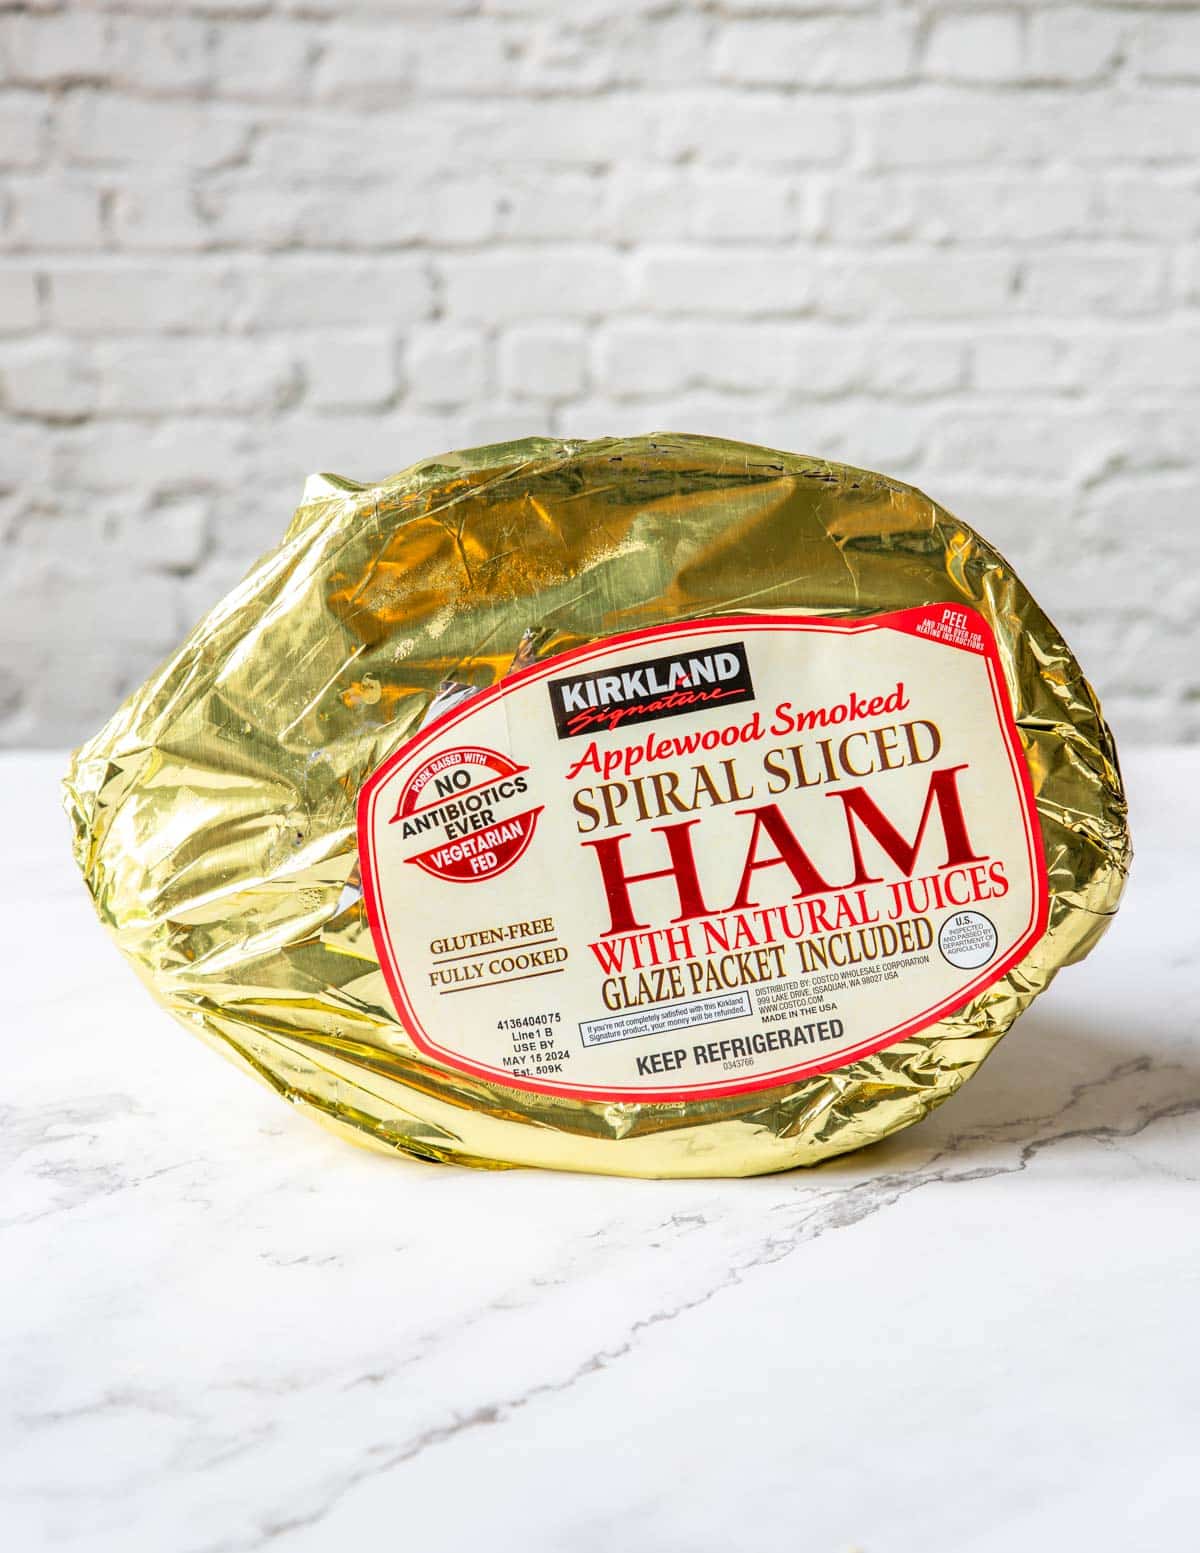 a gold foil wrapped spiral cut smoked ham from Costco